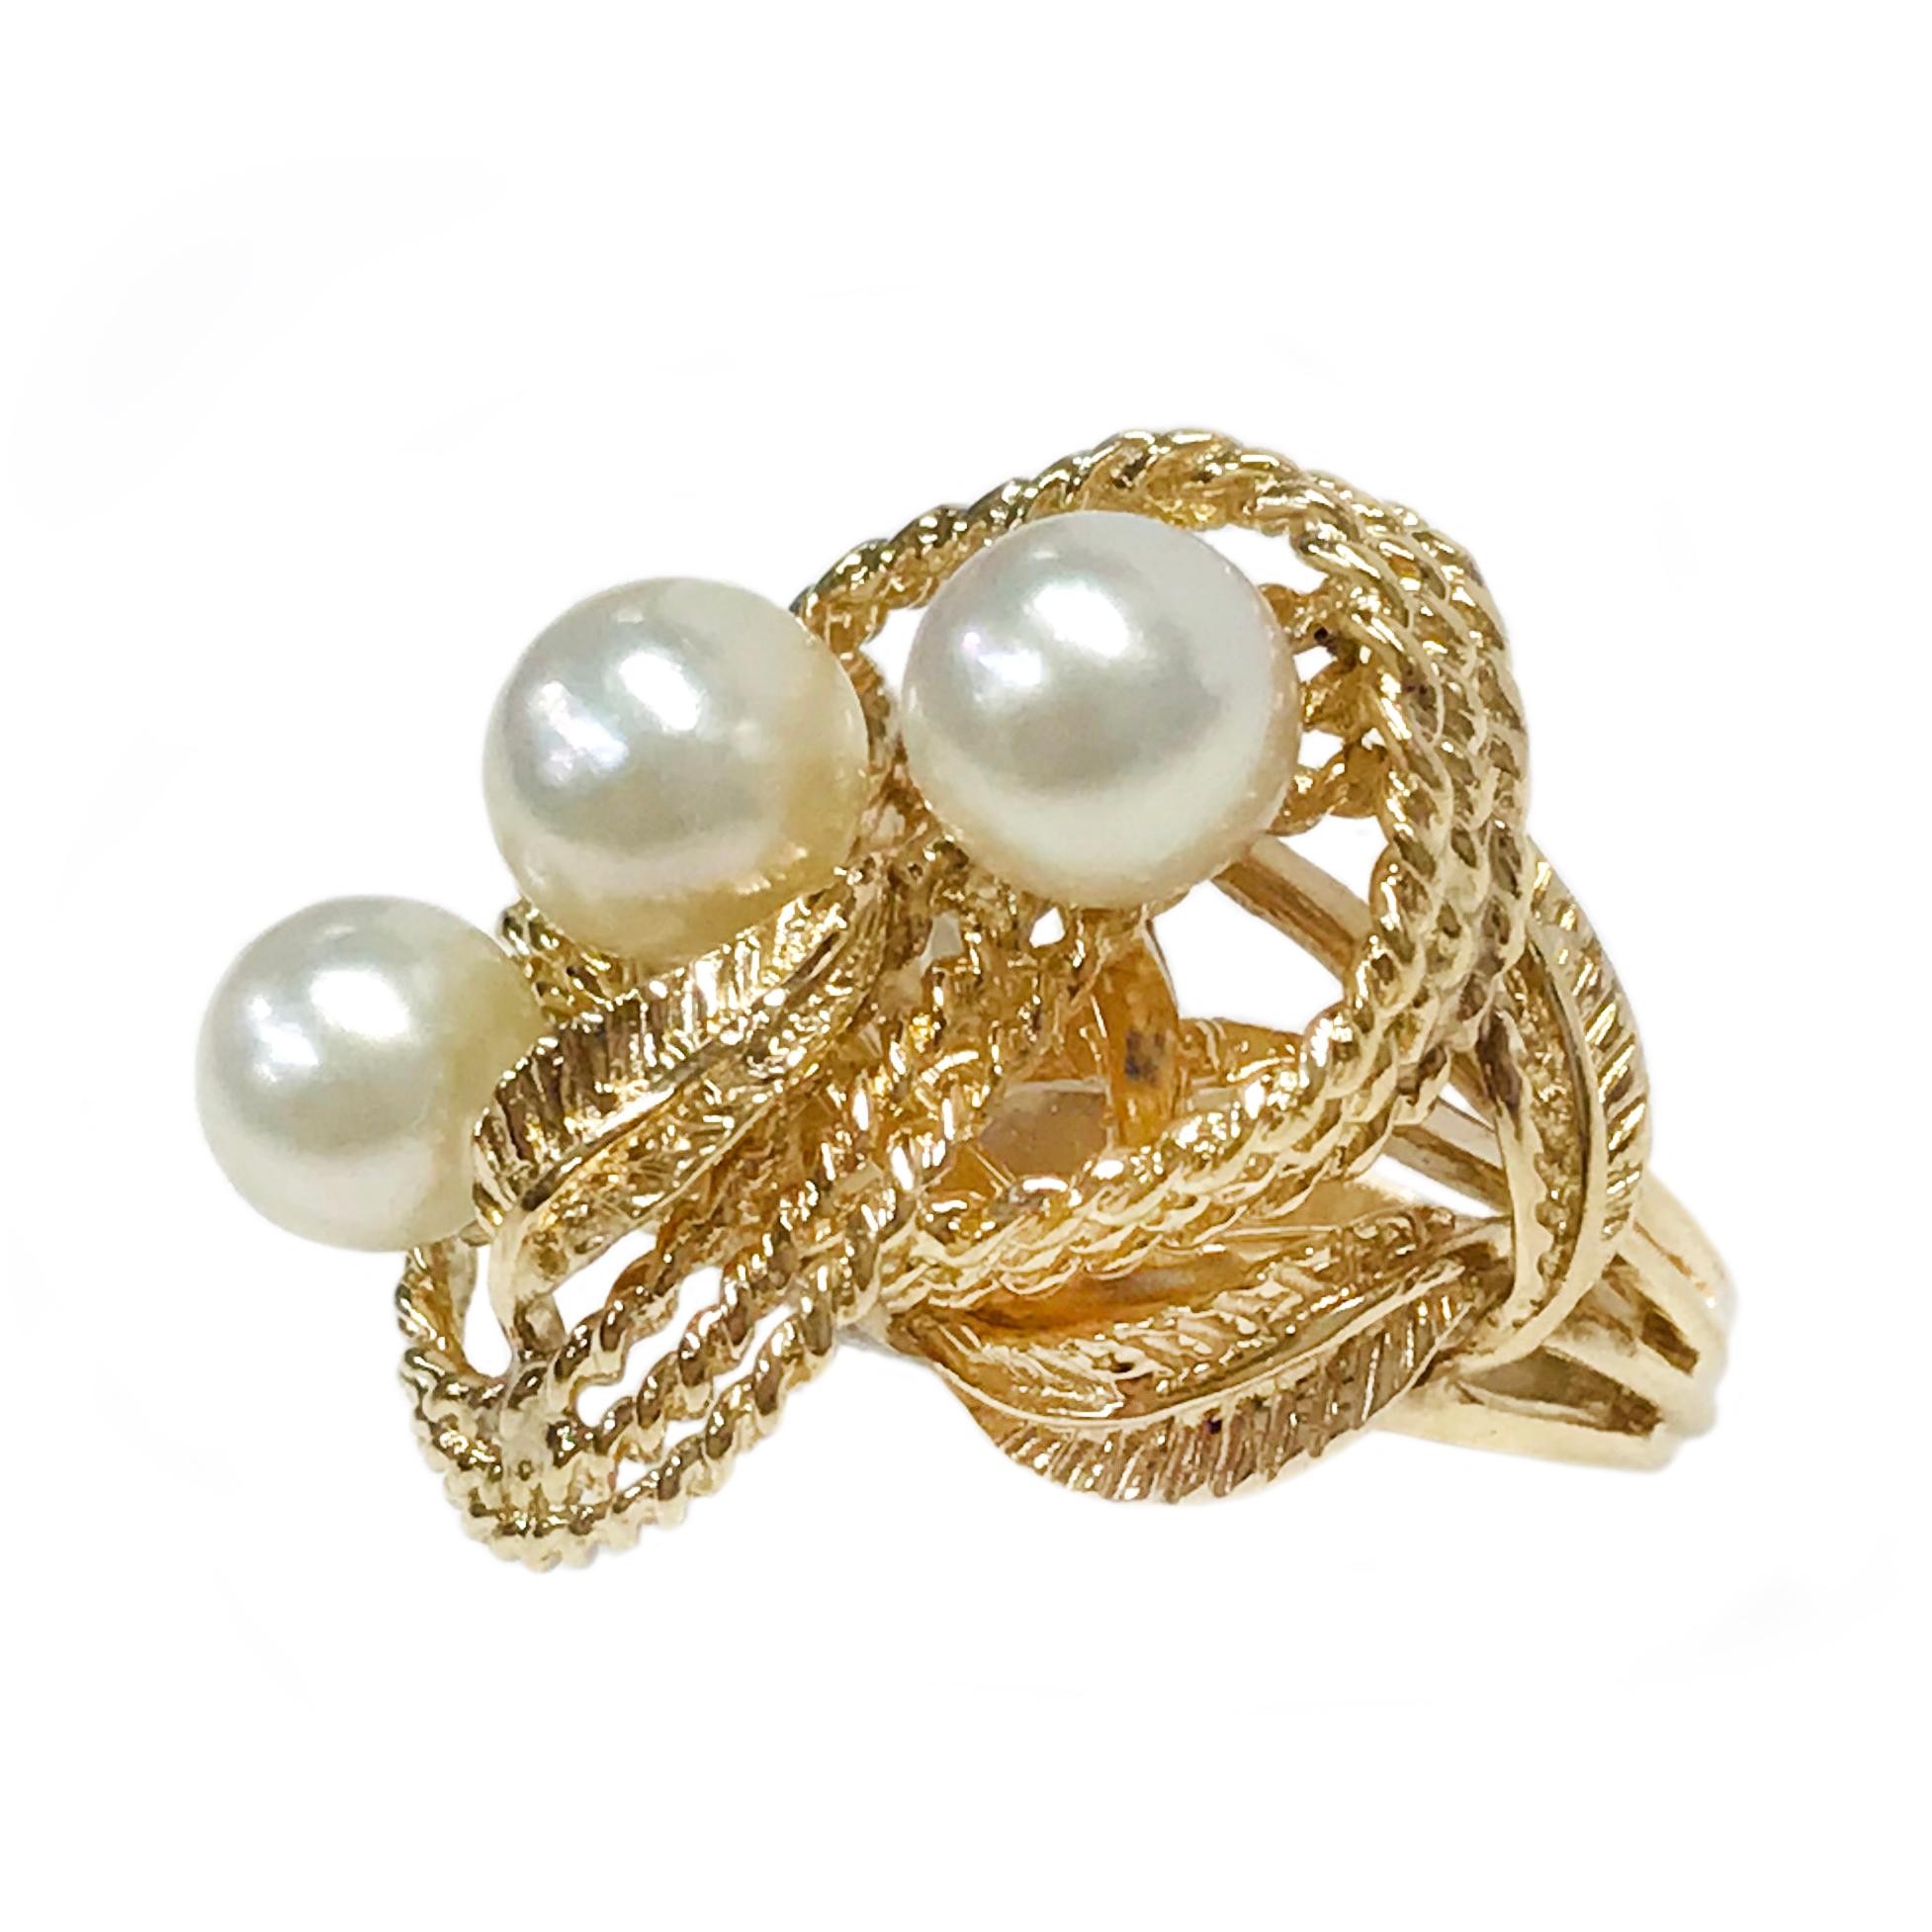 14 Karat Twisted Wire Three Pearl Ring. This statement ring features free form twisted gold rope looped and intertwining with three cultured pearls. There are five gold leaves in total, two near the split shack, and one at the center that